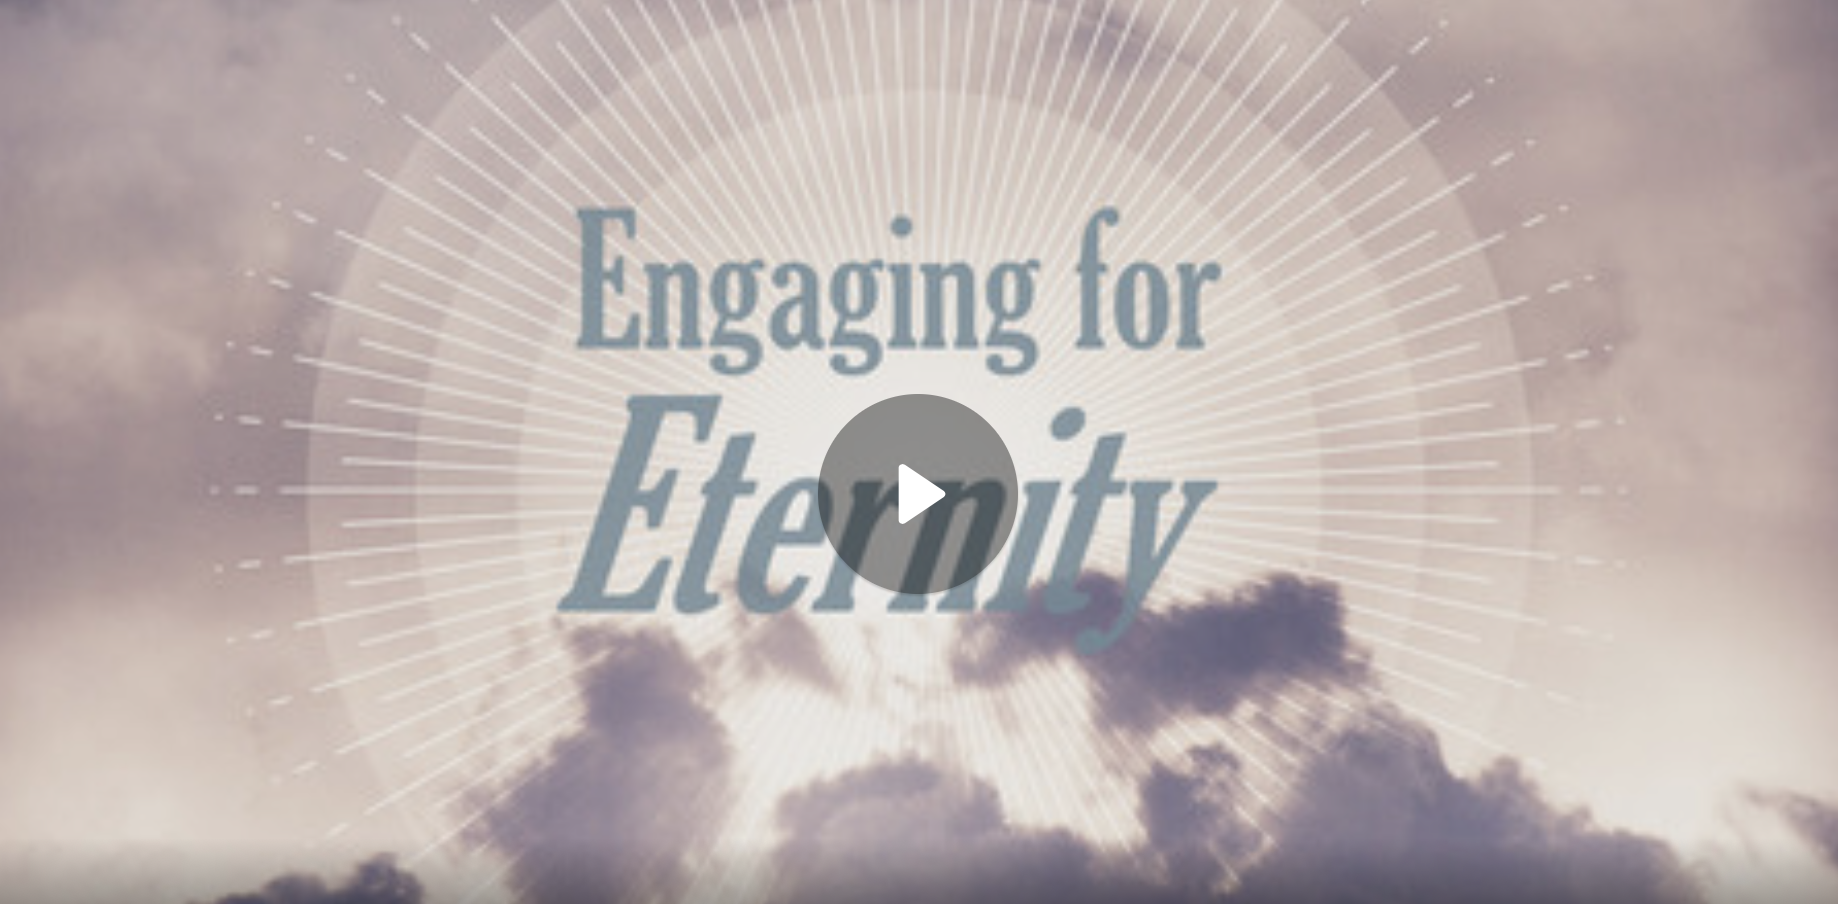 Engaging for Eternity